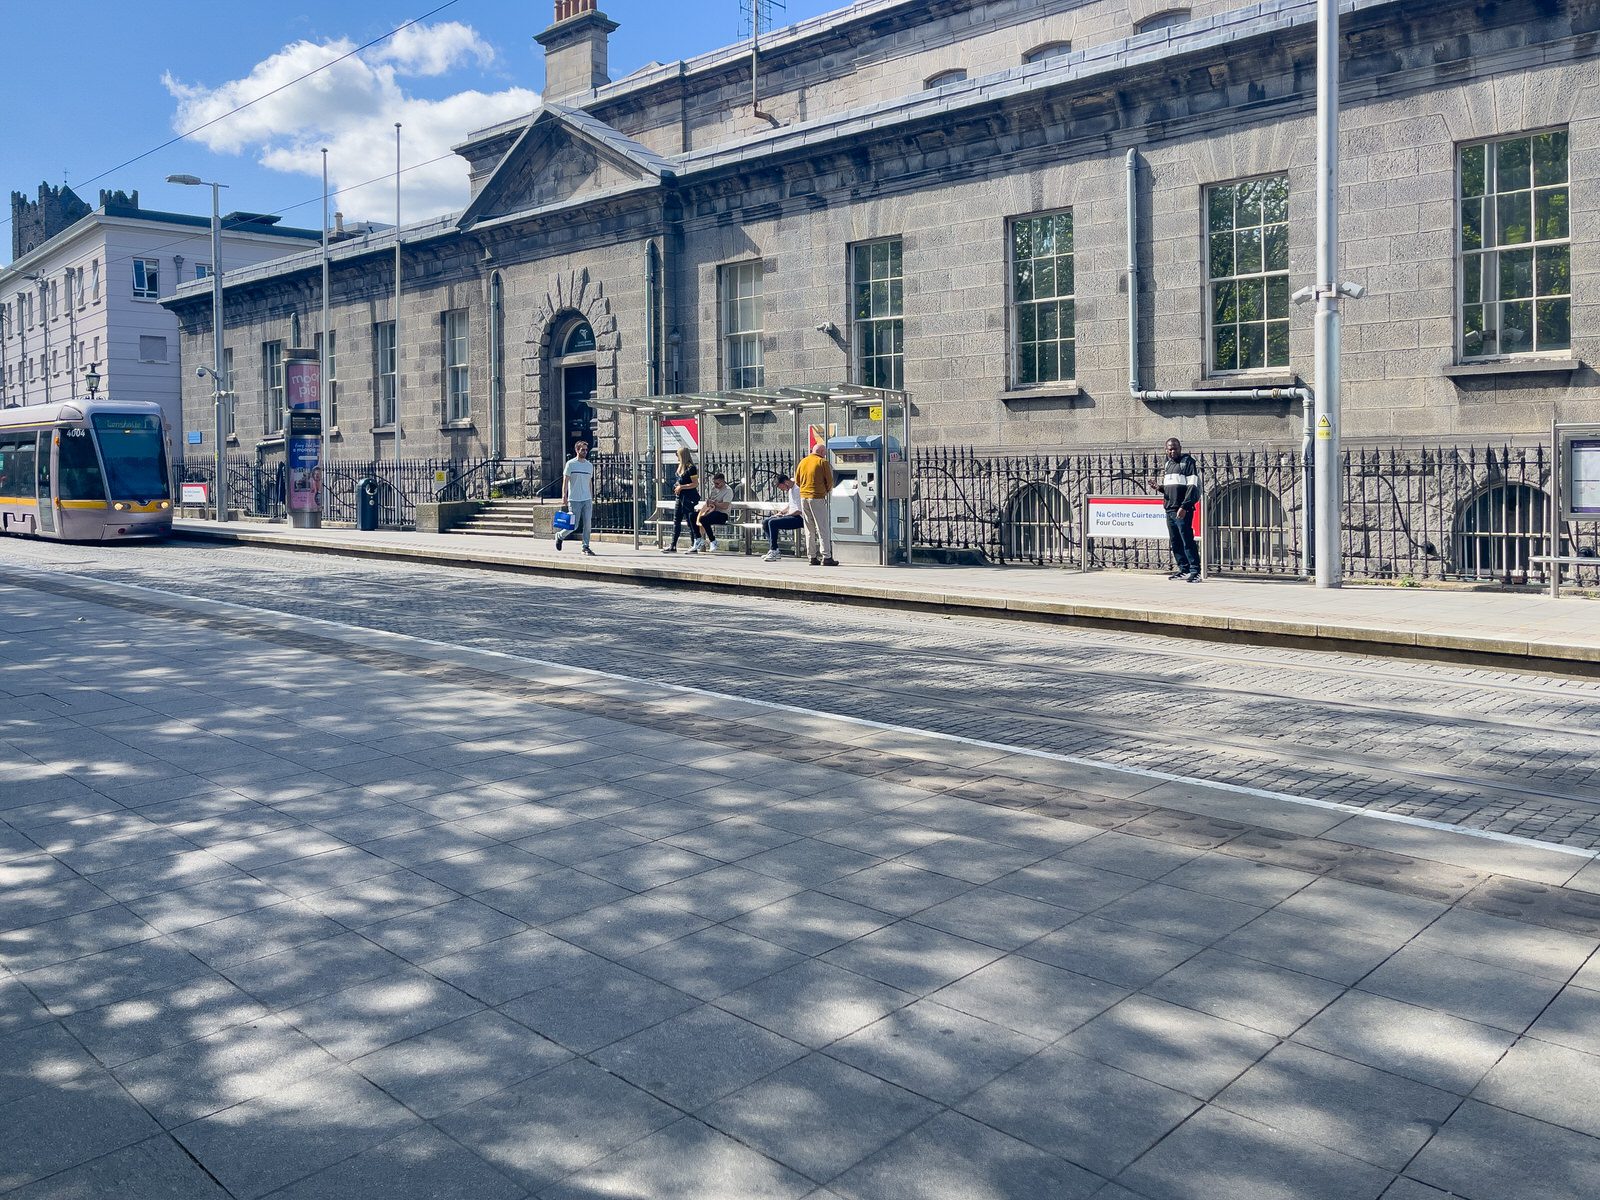 THE LUAS FOUR COURTS TRAM STOP [THERE IS MUCH TO BE SEEN HERE]-234099-1